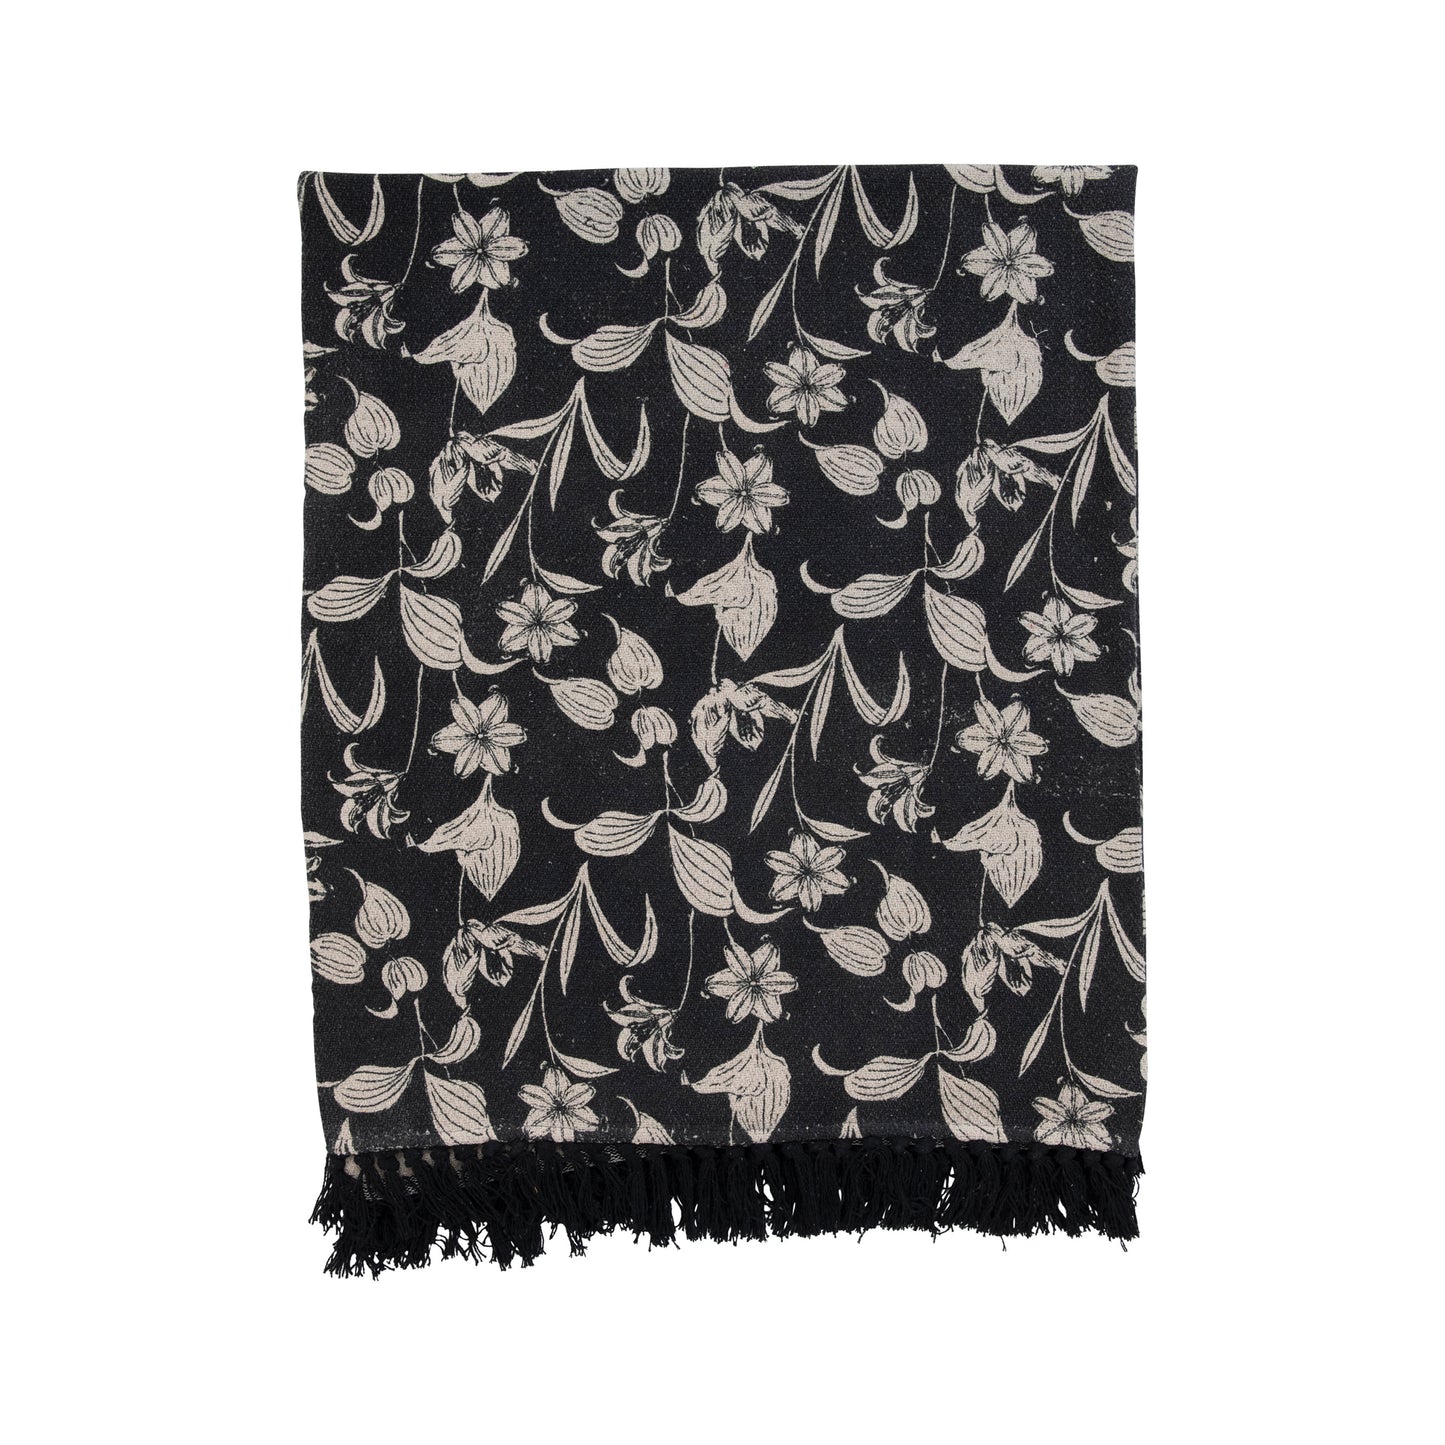 Recycled Cotton Printed Throw w/ Fringe | Black & Cream Floral Pattern